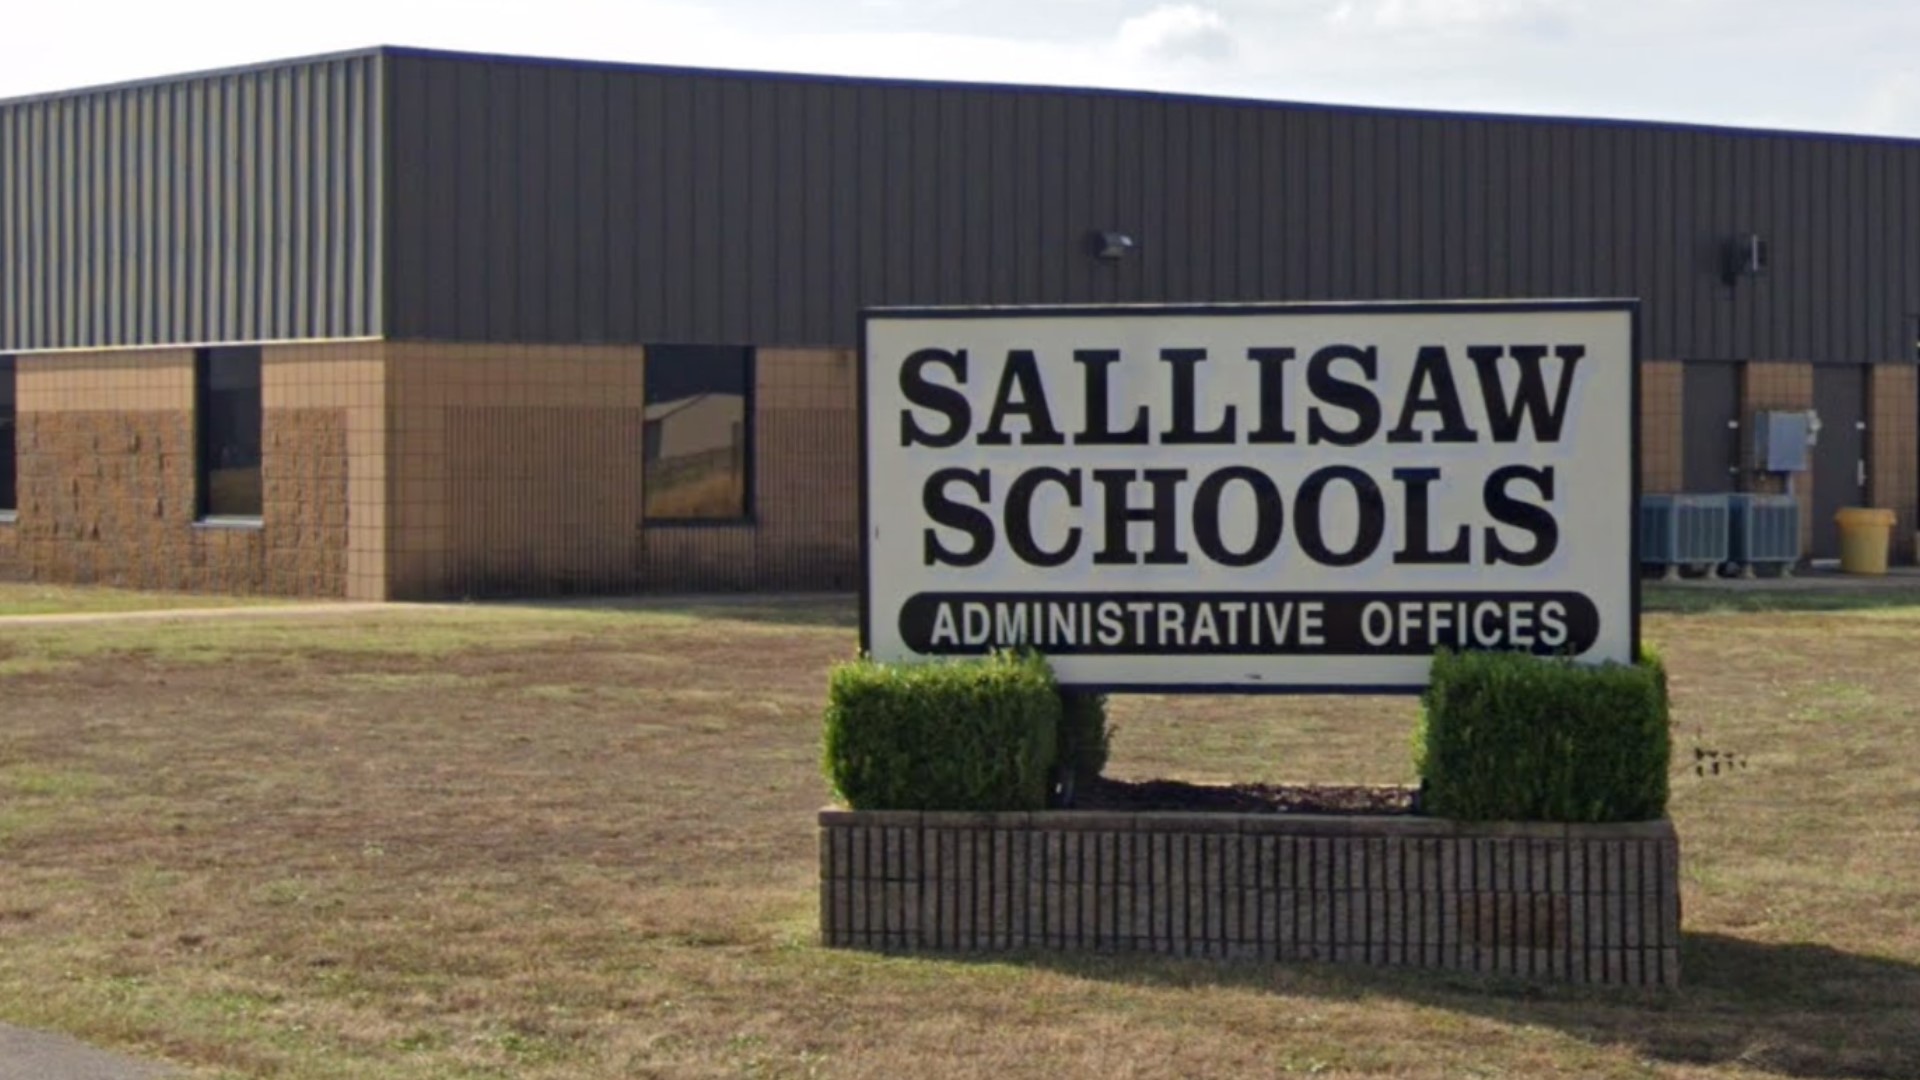 Sallisaw School Resource Office Blaine Griffey has been placed on administrative leave after alleged 'inappropriate contact' with a student.